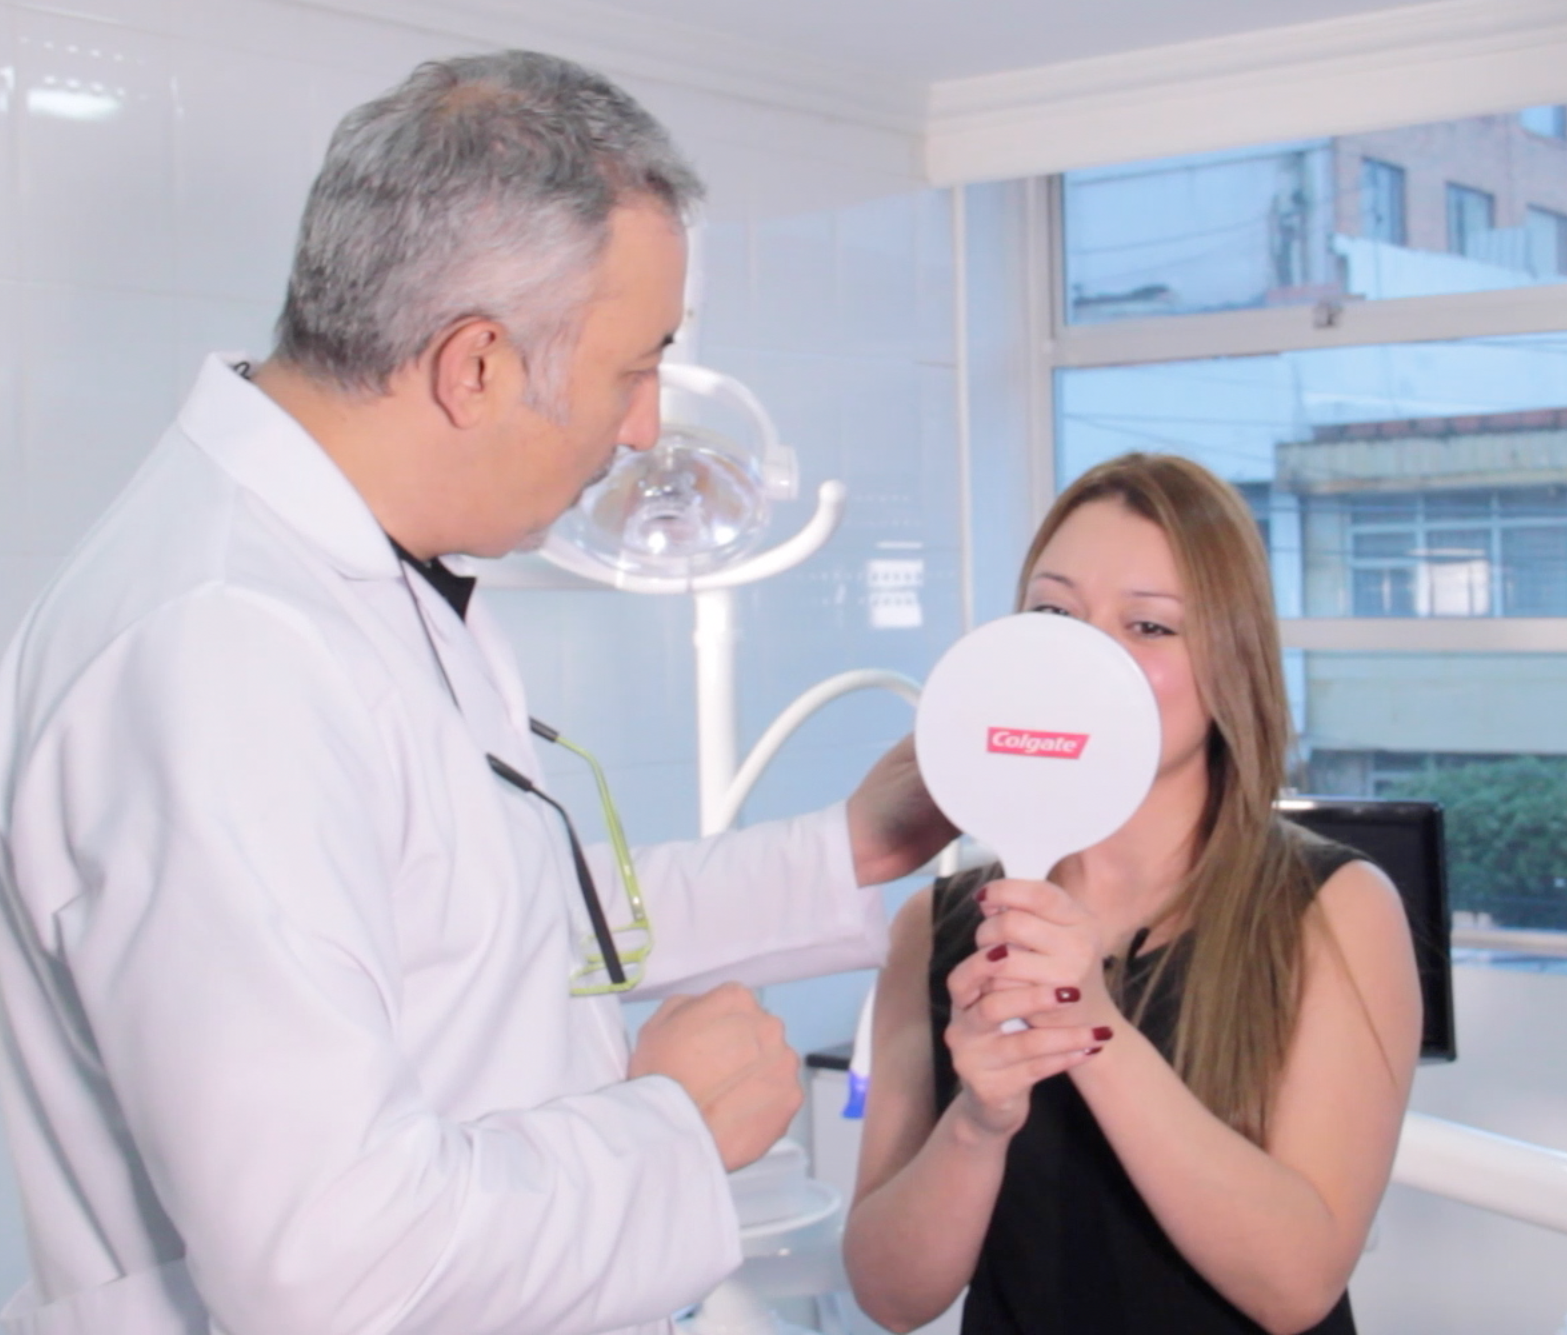 Teeth Whitening by DR. IVÁN LIND